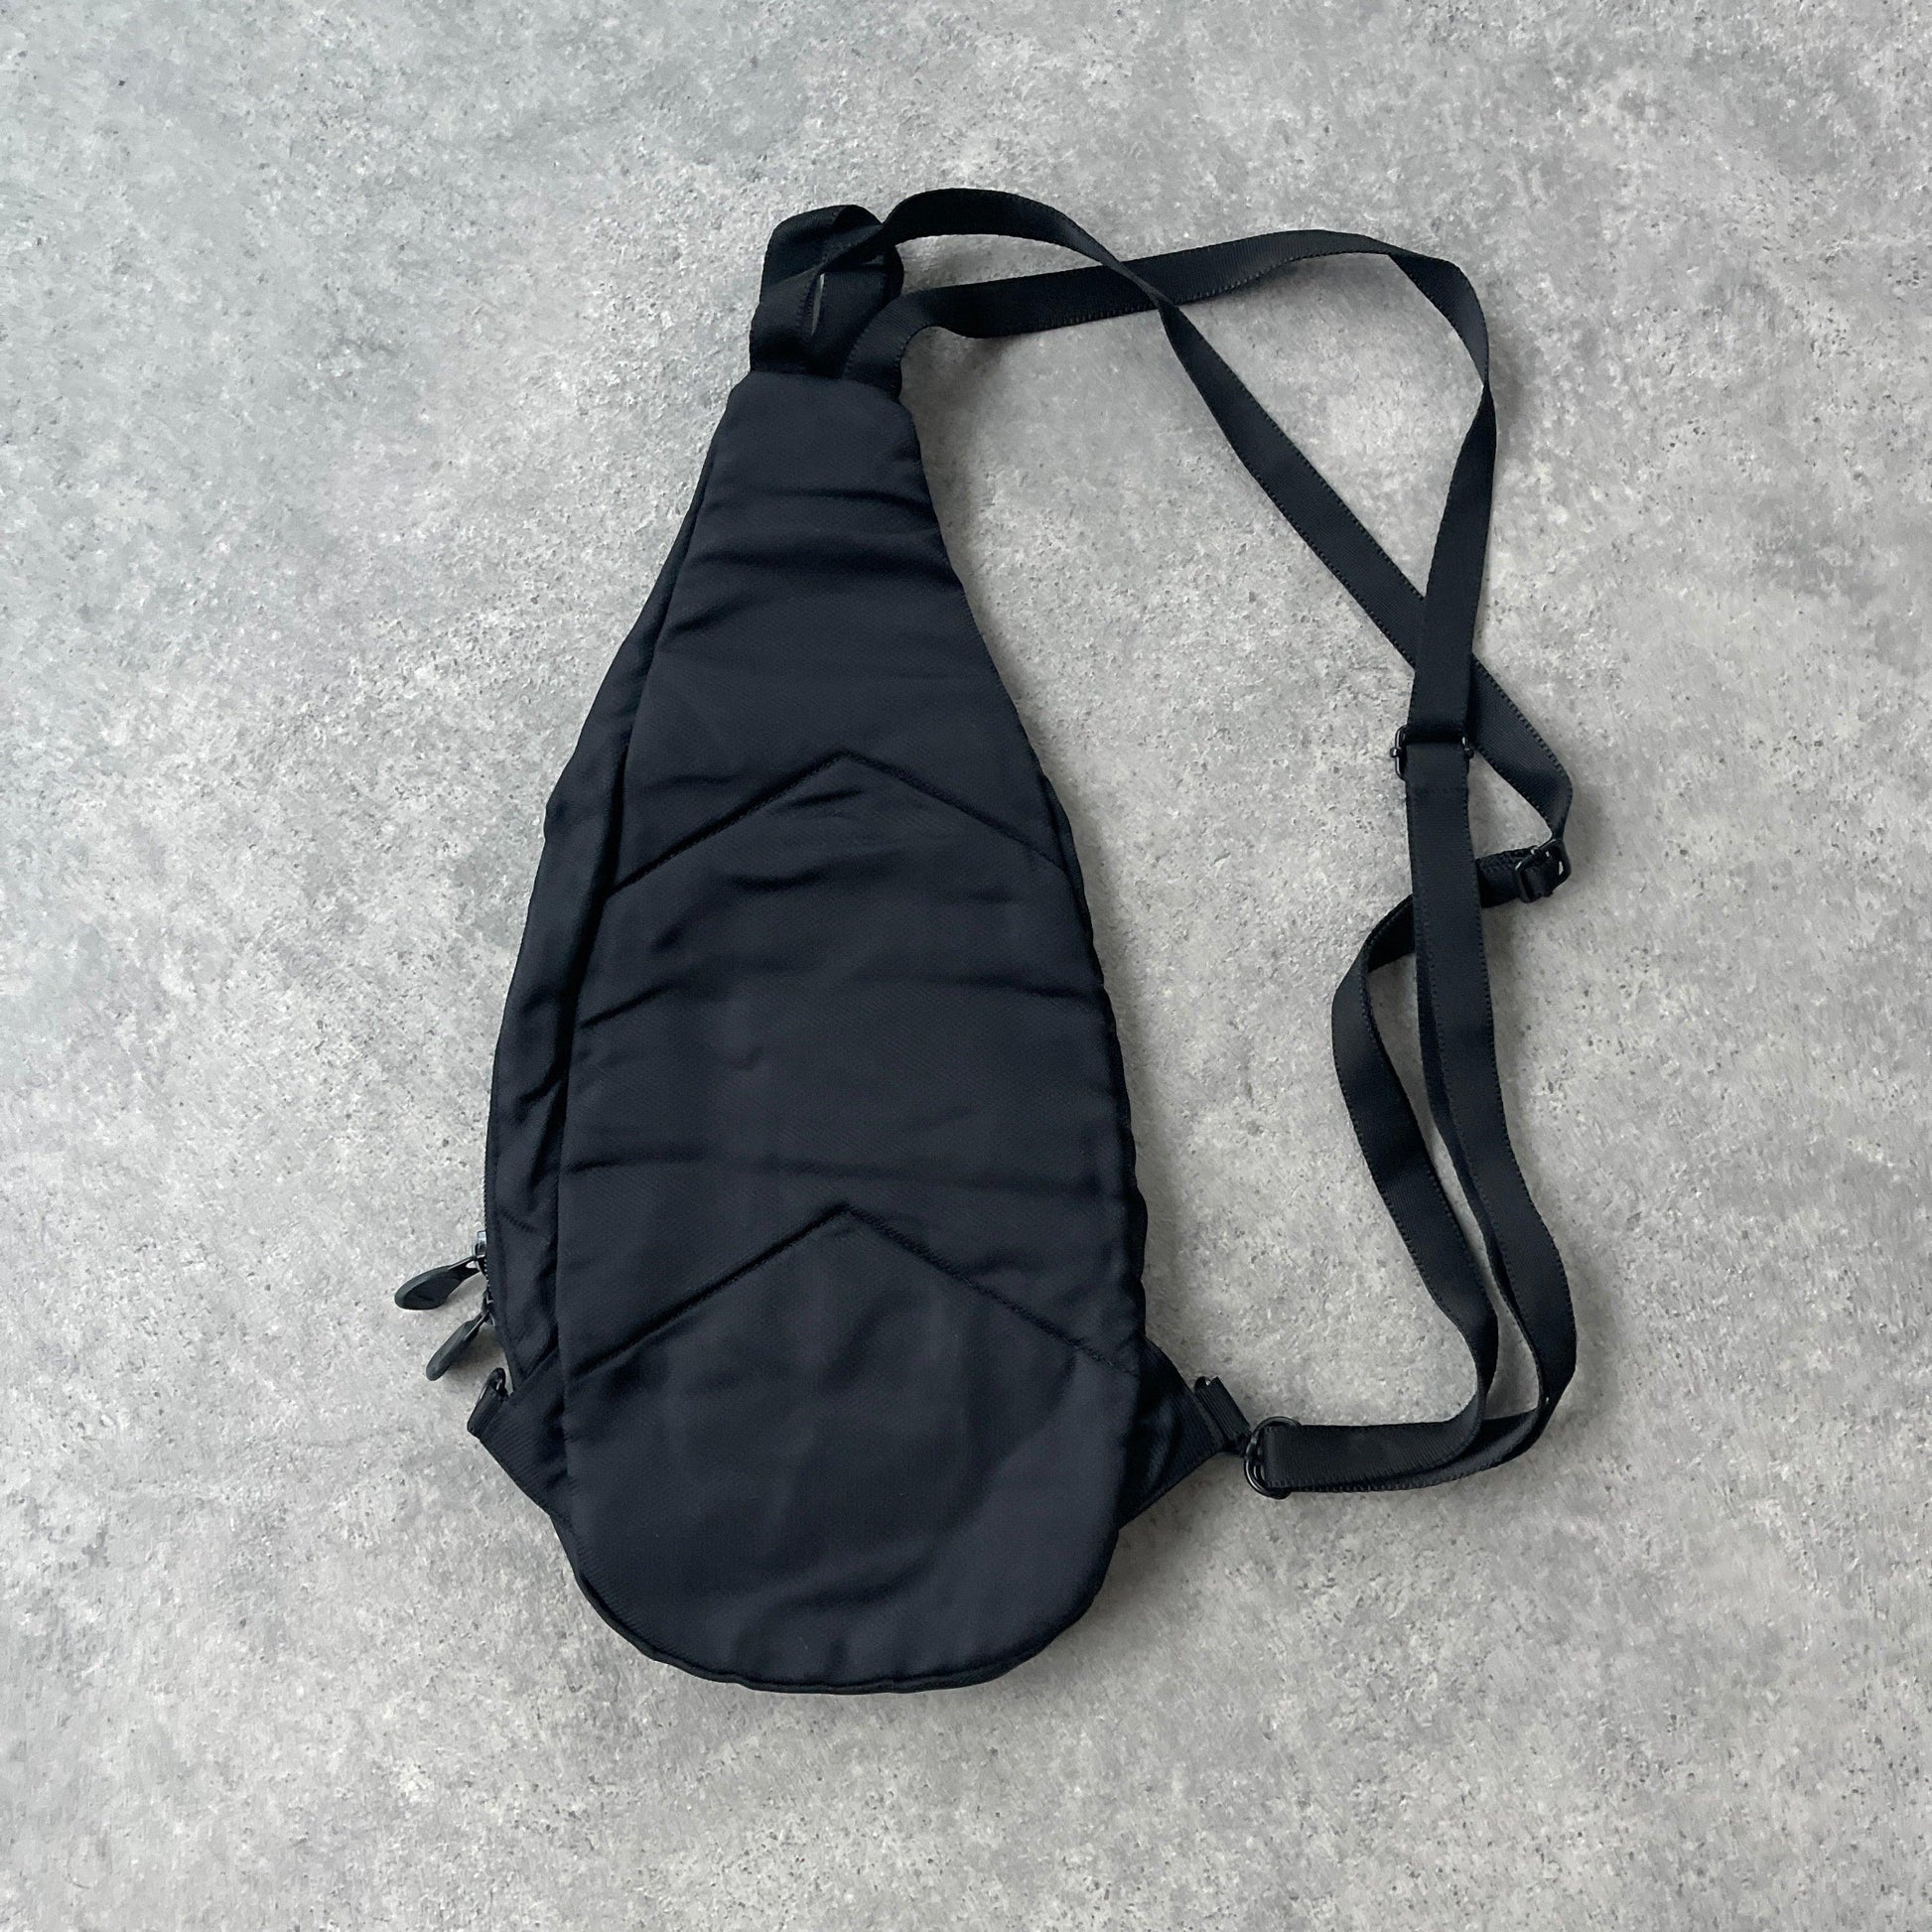 Nike 1990s technical sling bag (17”x9”x4”) - Known Source